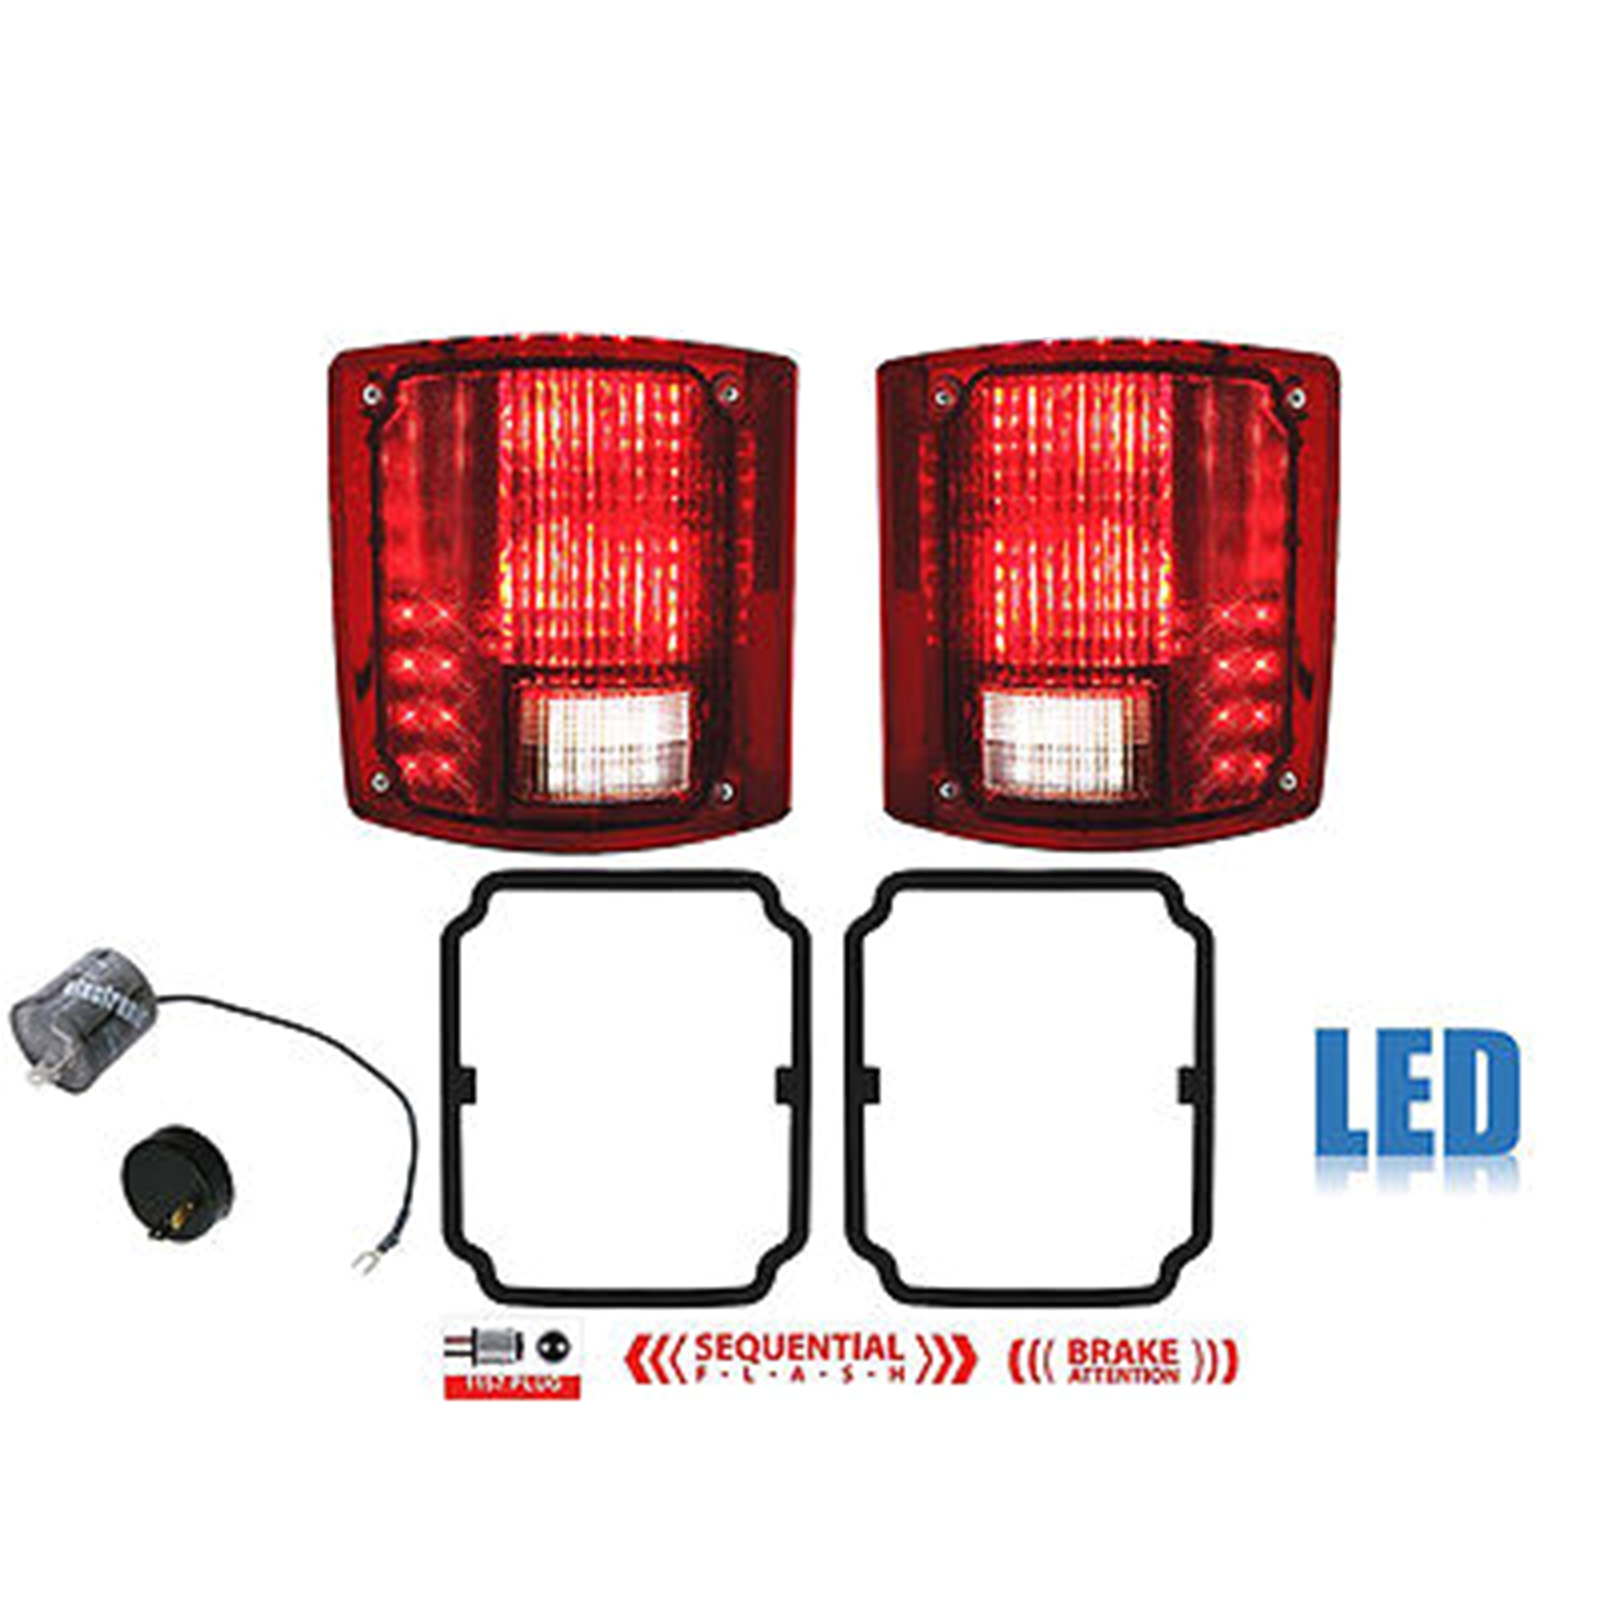 2006 Silverado Led Tail Lights 73 91 Chevy Gmc Truck Led Sequential Tail Light Lens Gaskets Pair